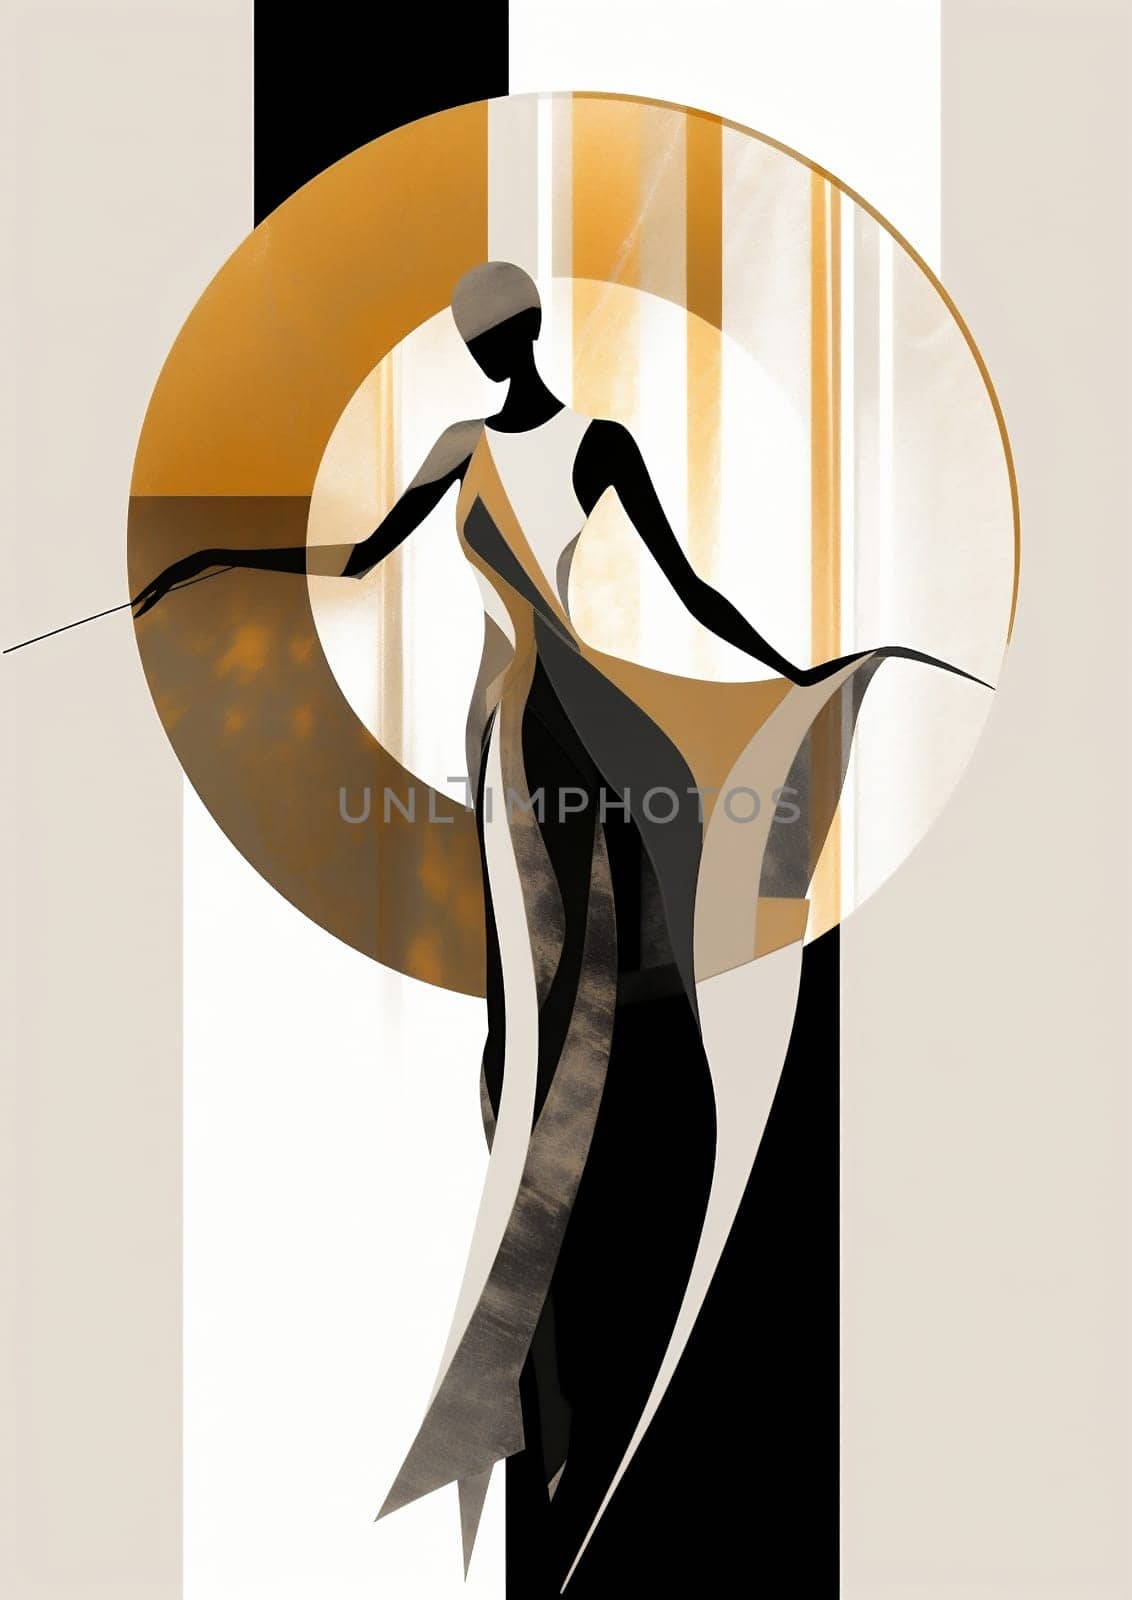 Lady illustration female retro young beauty drawing fashion women dance background art vintage party poster dress design glamour graphic style hair person